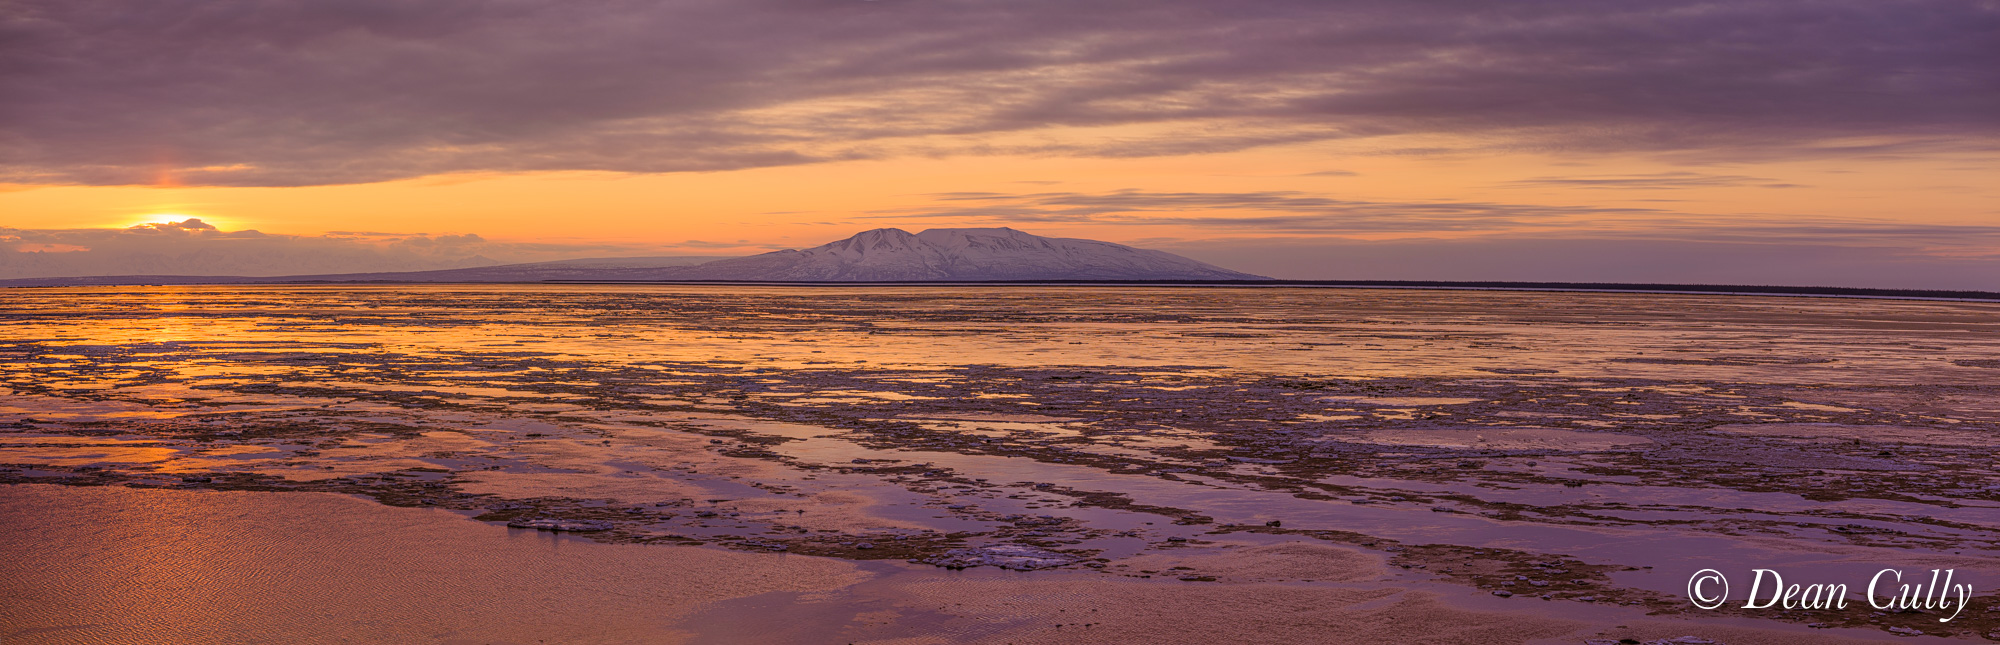 alaska_anchorage_sunset_cook_inlet_mtsusitna_panoramic_deancully_2887